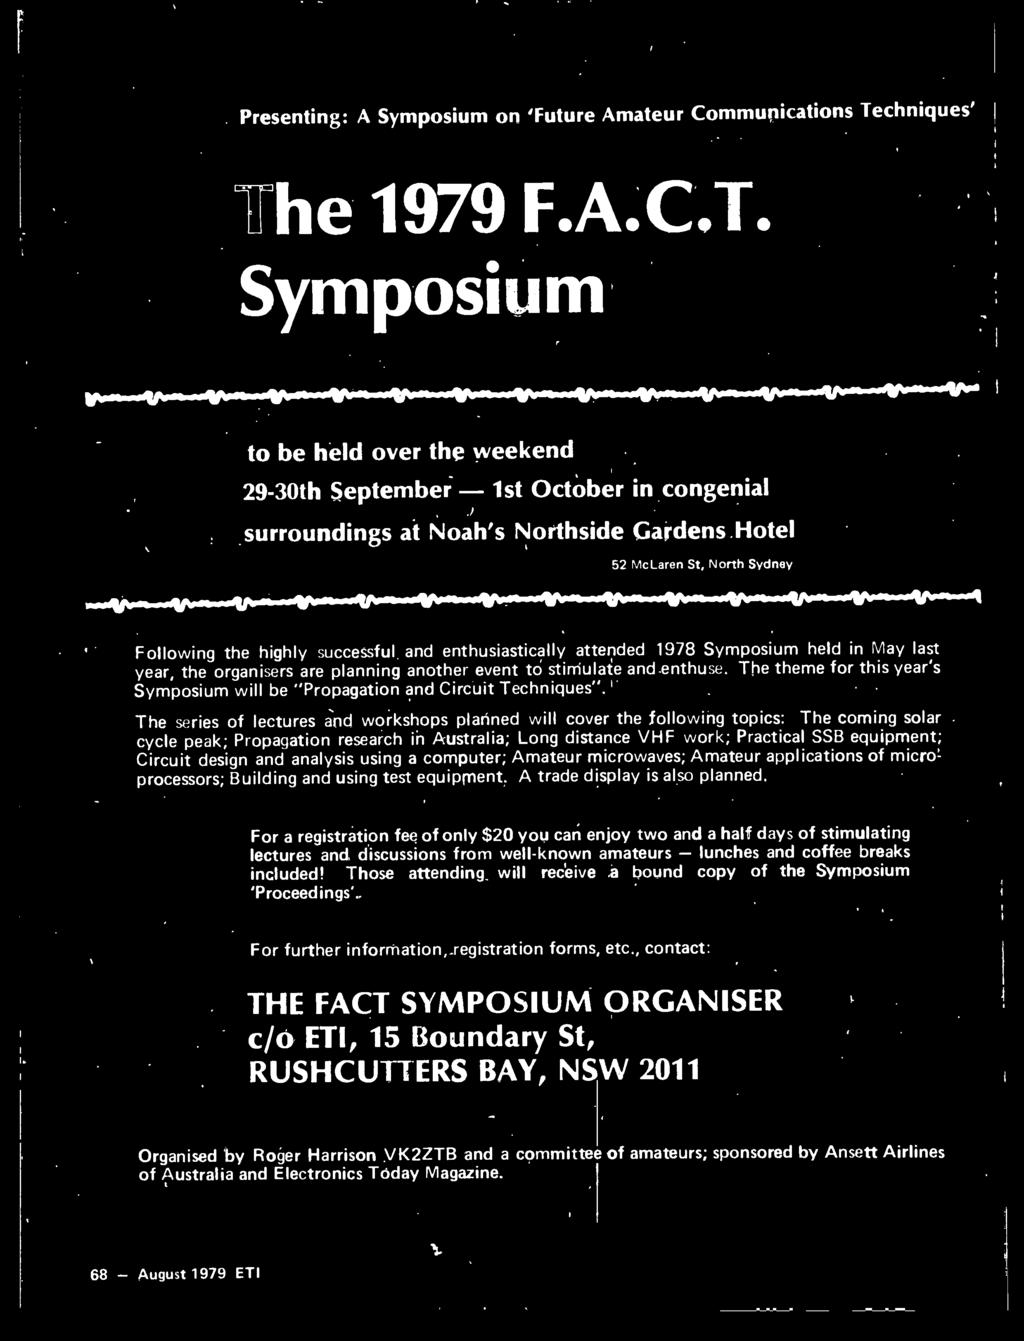 enthusiastically attended 1978 Symposium held in May last year, the organisers are planning another event to stimulate and enthuse.